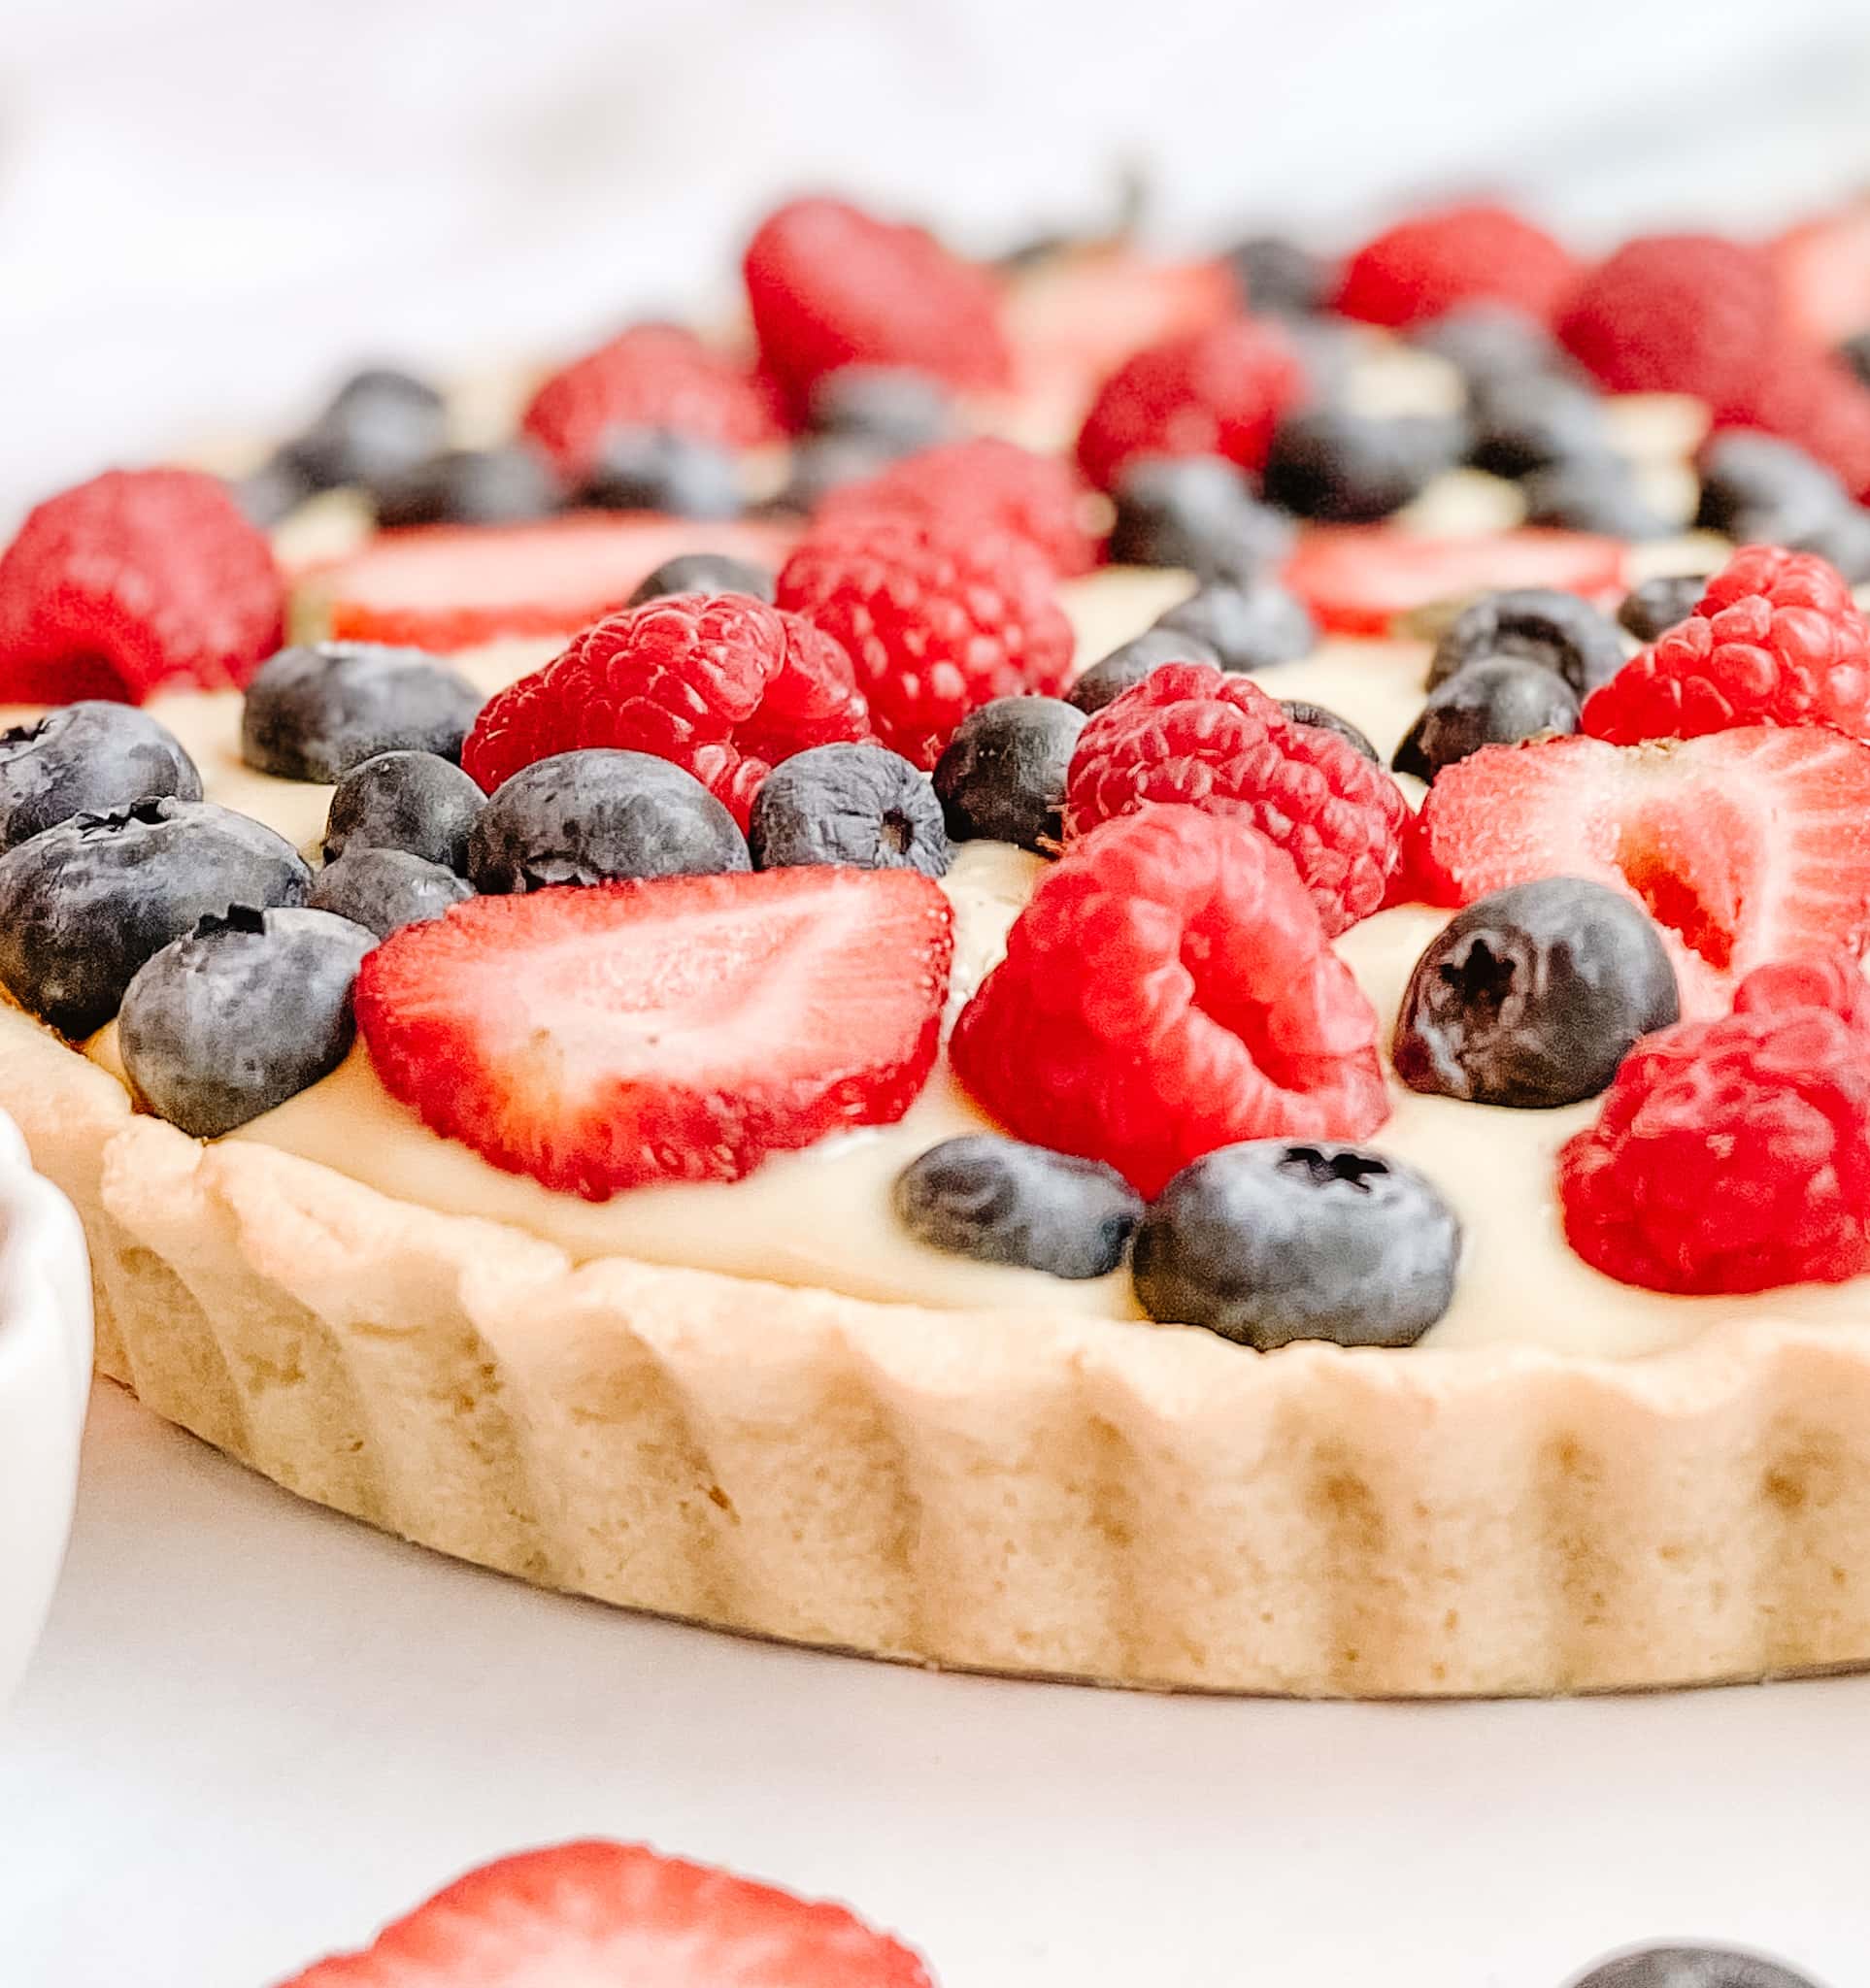 A front shot of the vanilla cream fruit tart. The photo is close up to see the details of the blueberries, strawberries, and raspberries.